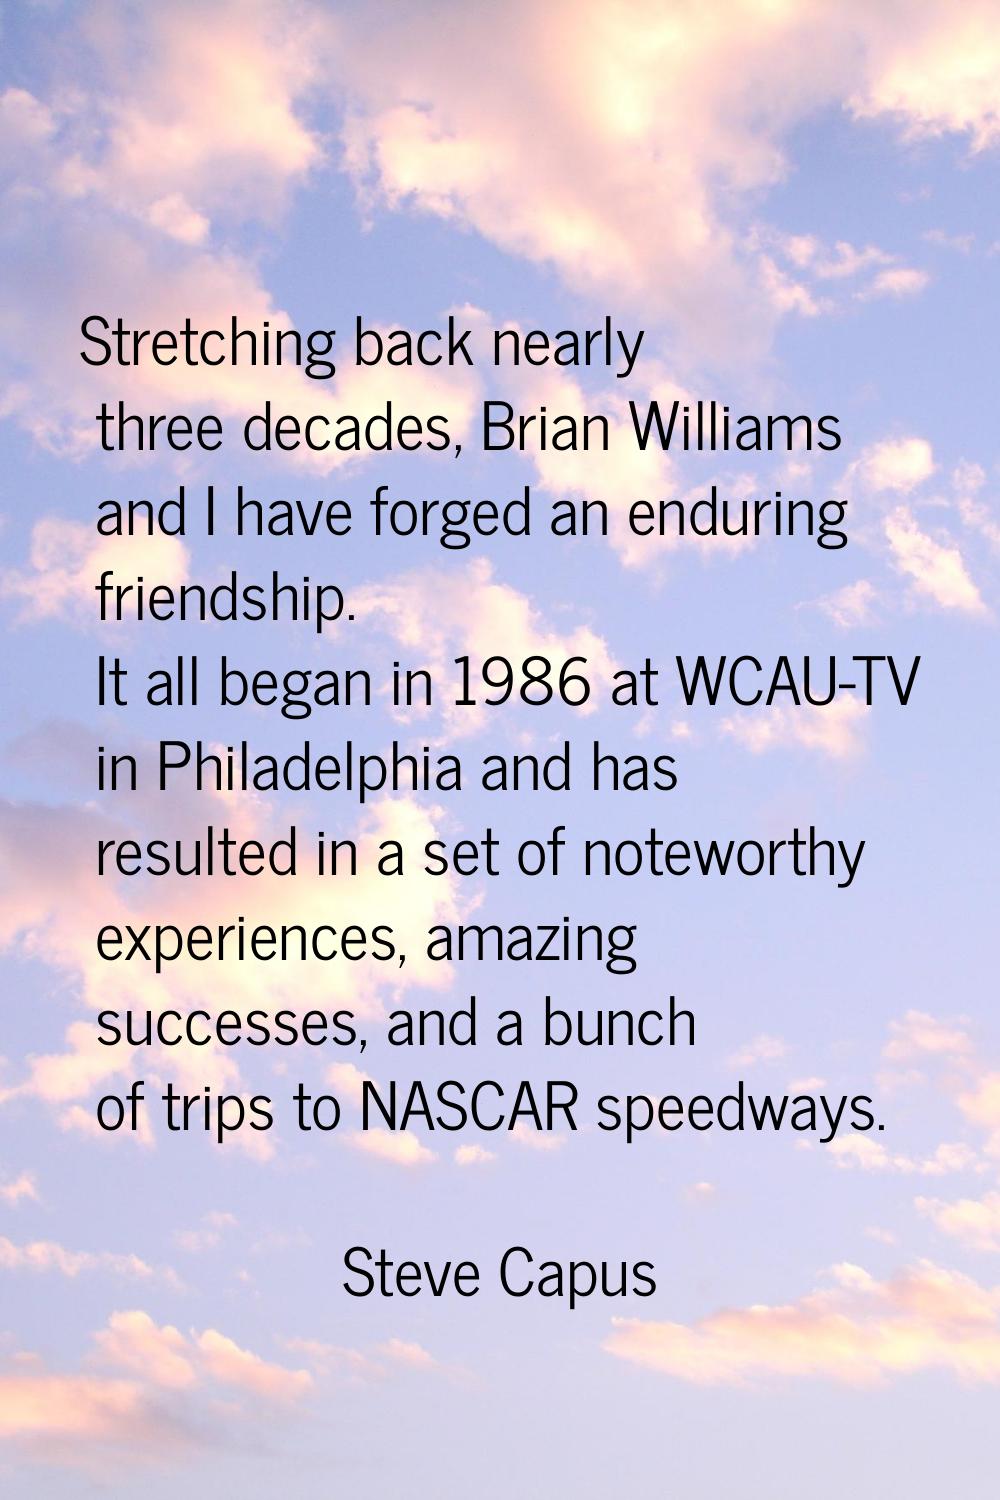 Stretching back nearly three decades, Brian Williams and I have forged an enduring friendship. It a